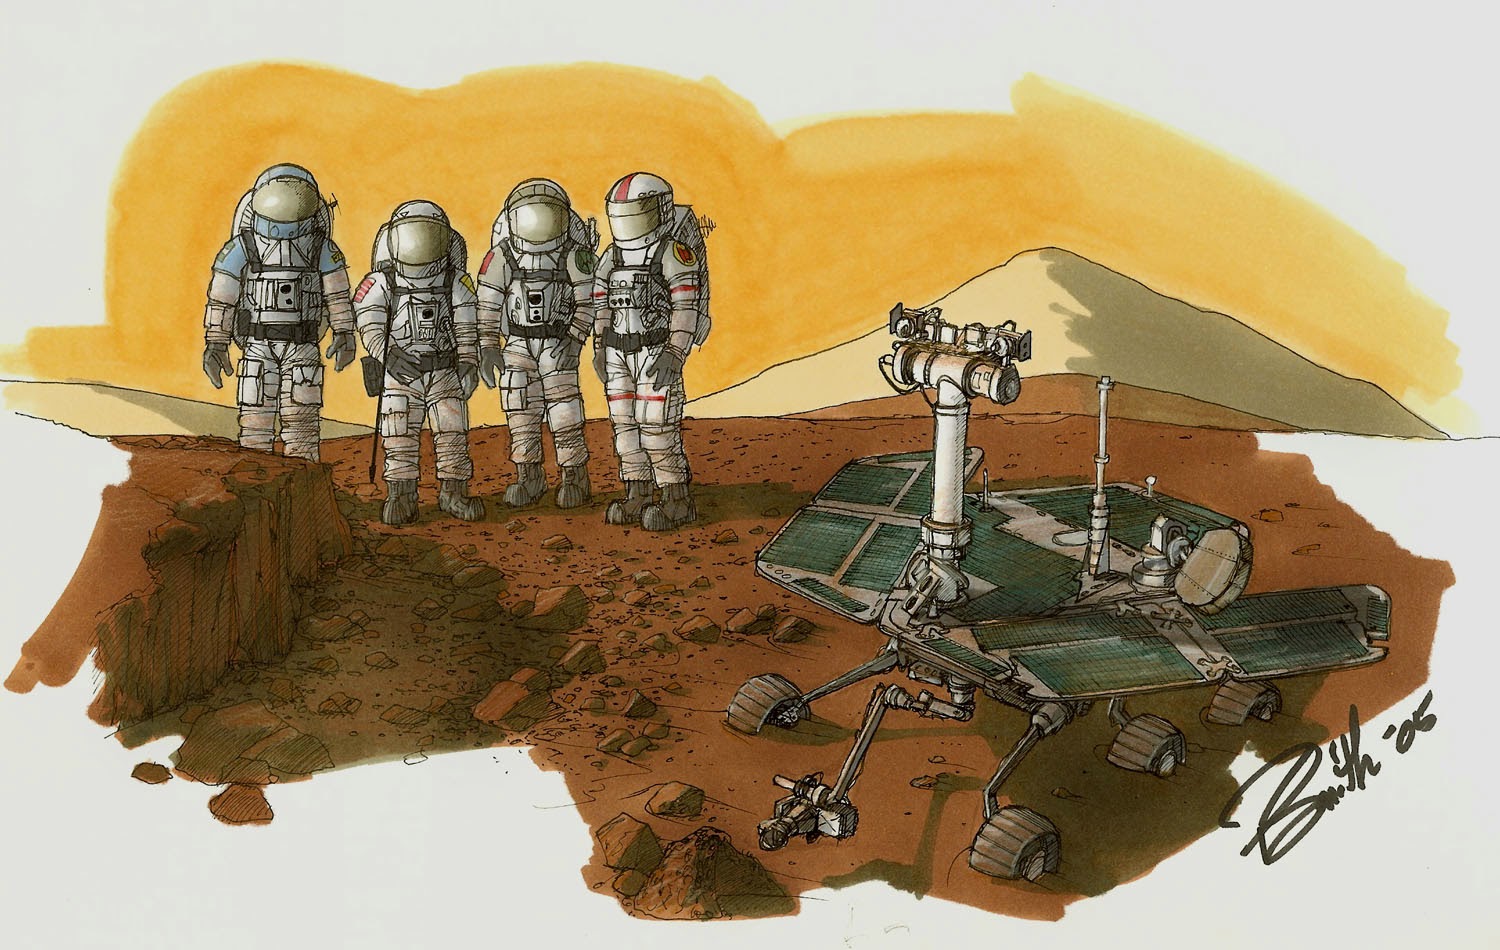 Spirit Mars rover by Phil Smith